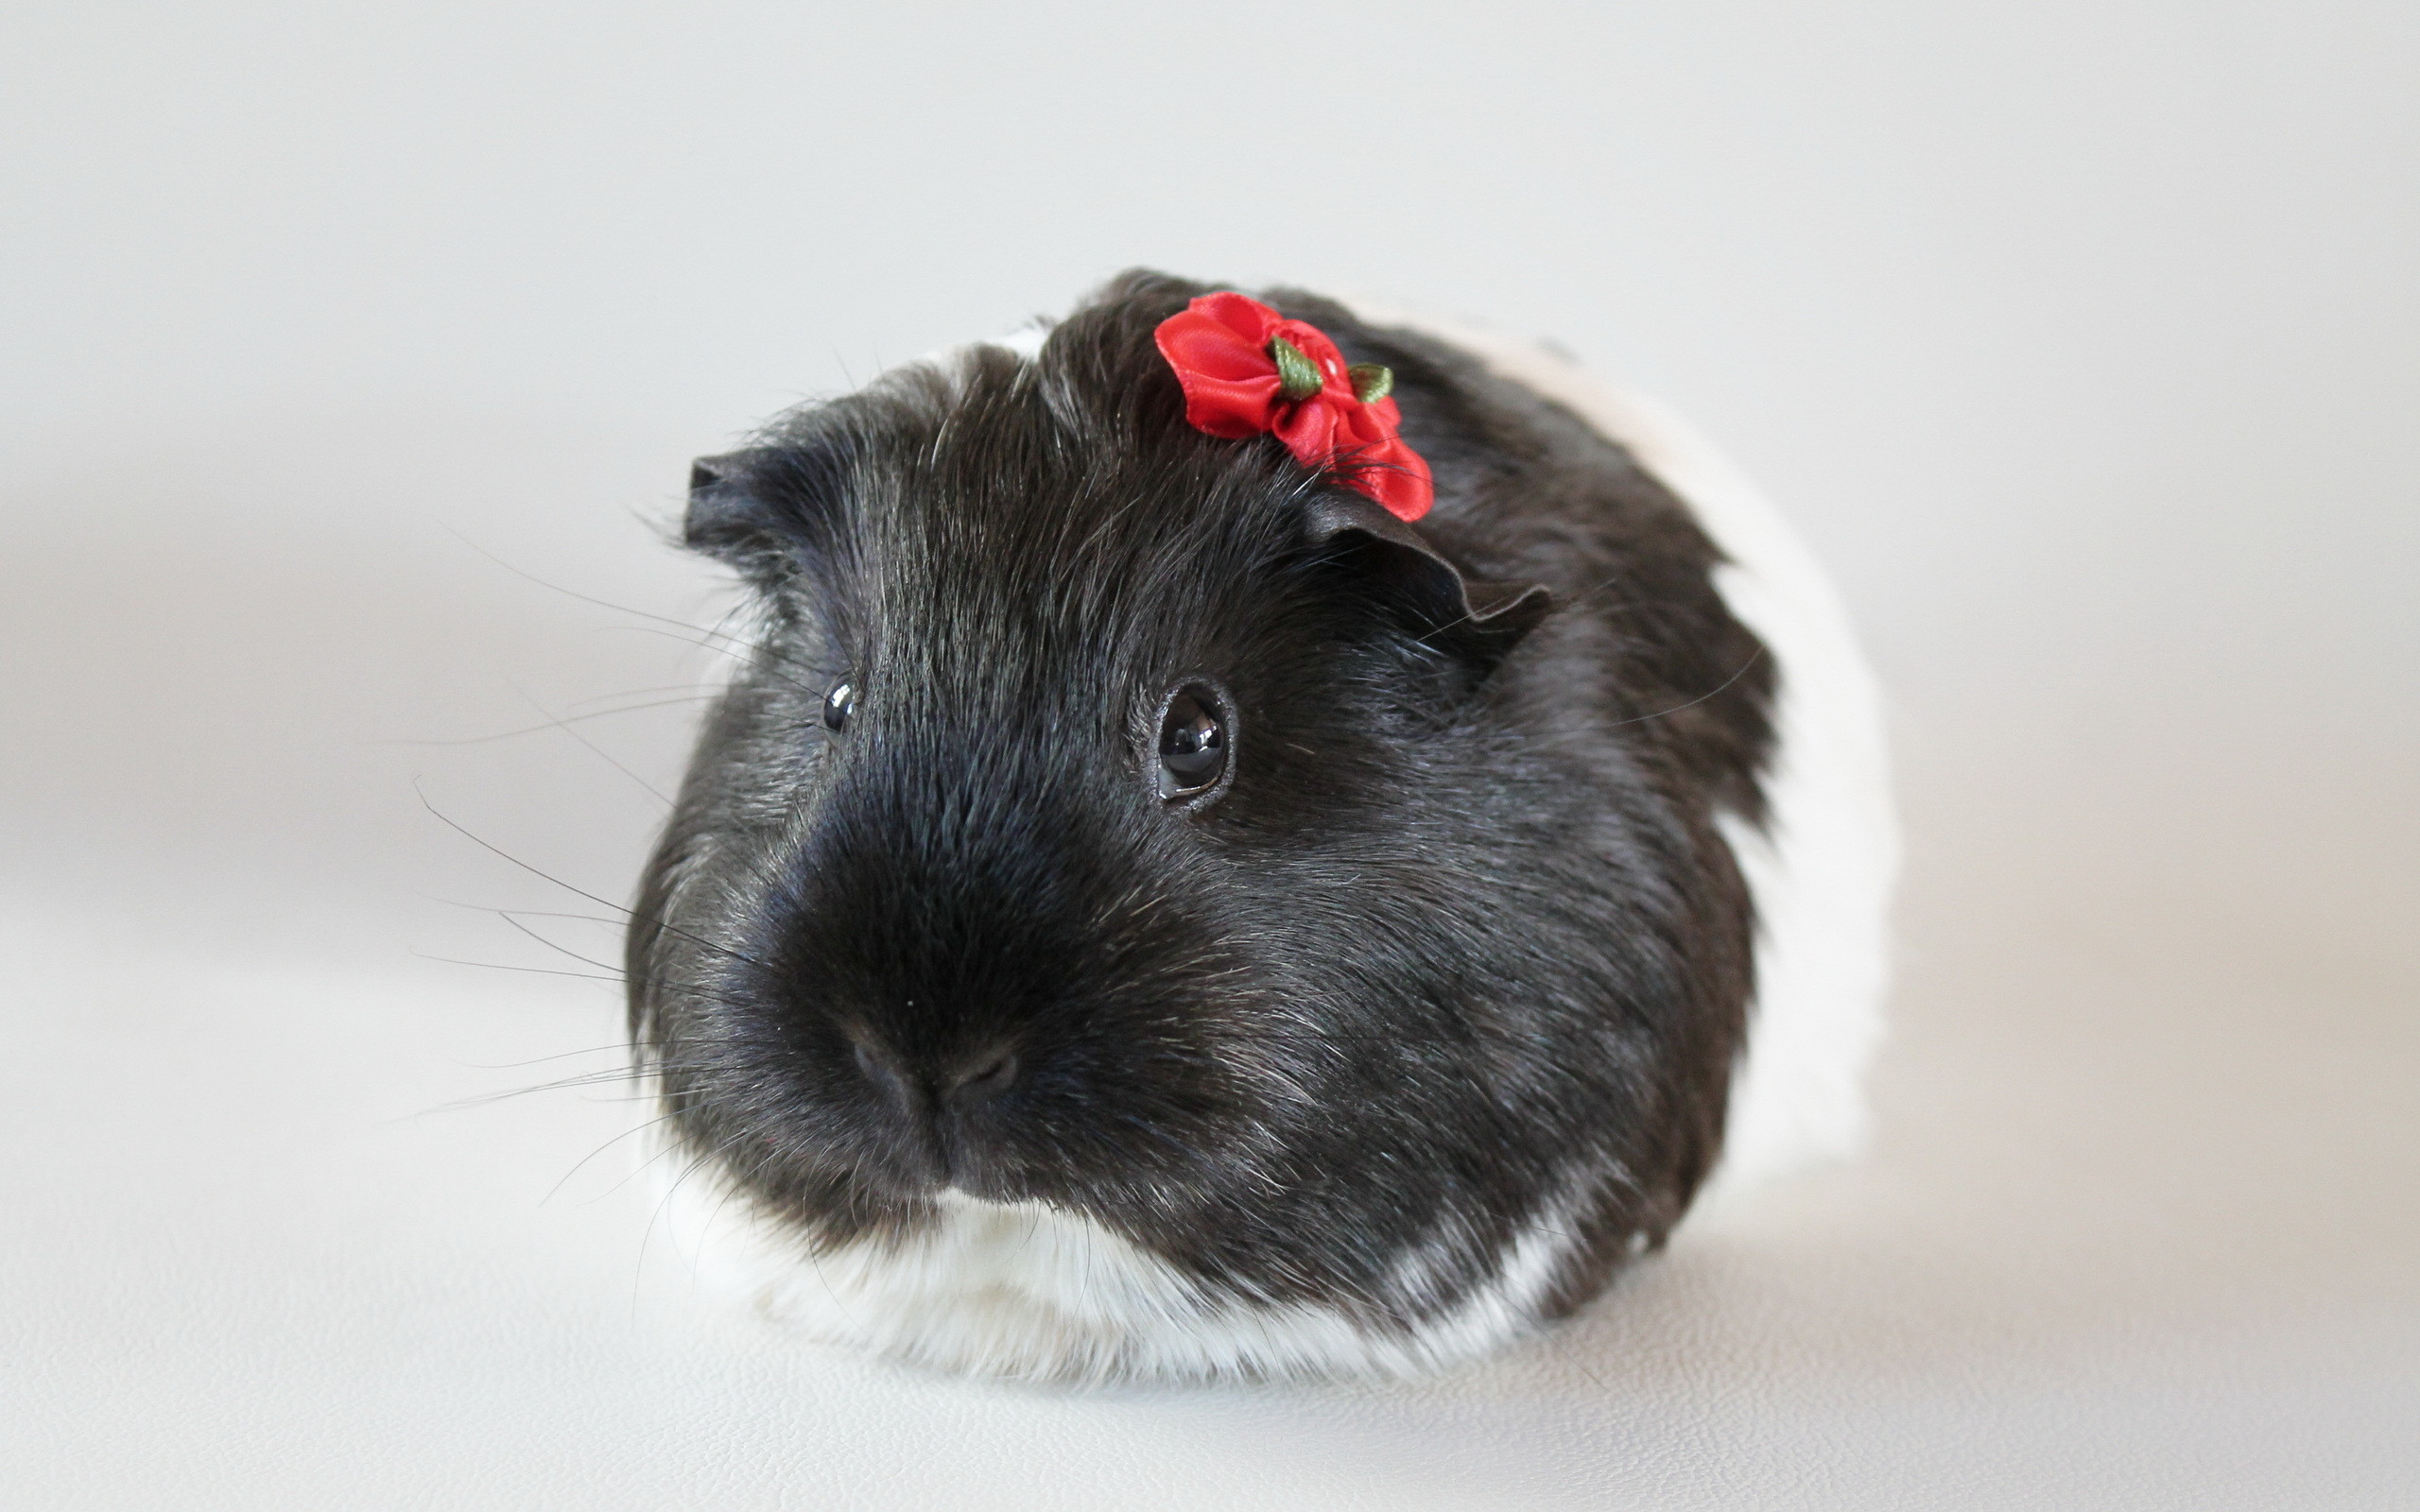 2560x1600 High definition picture of Guinea pig, desktop wallpaper of macro .